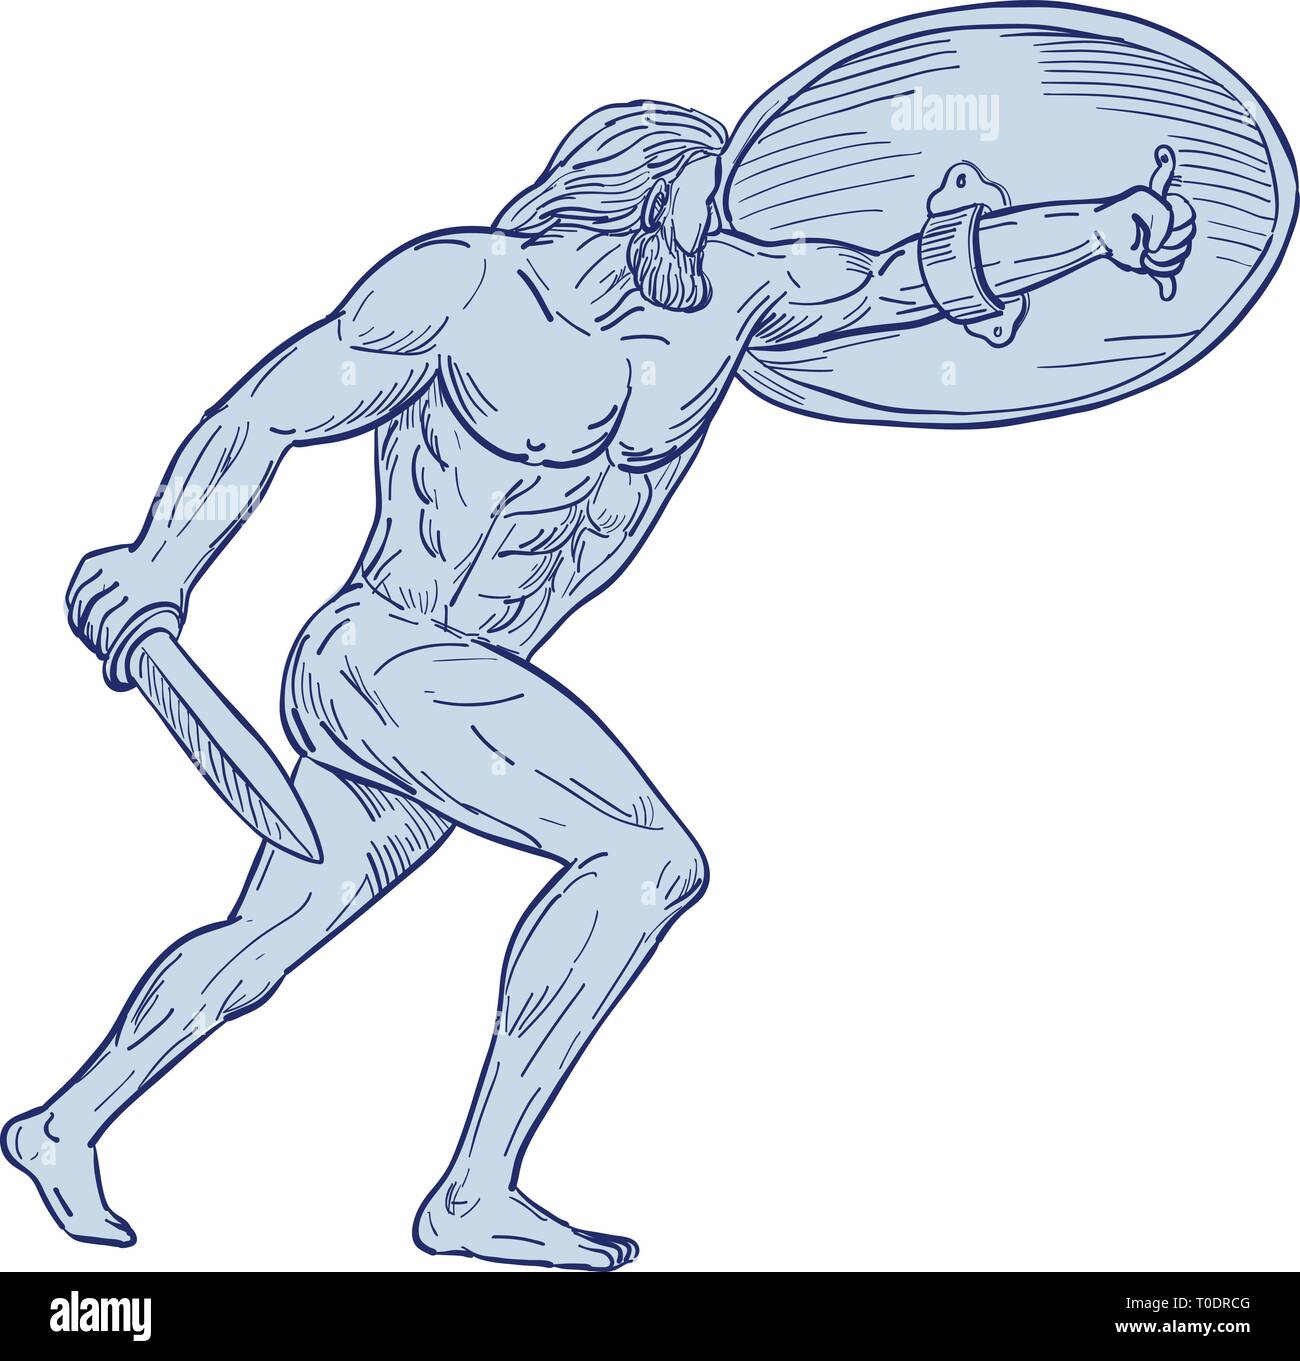 Drawing sketch style illustration of Hercules, a Roman hero and god equivalent to Greek divine hero Heracles, shielding with shield and carrying a swo Stock Vector